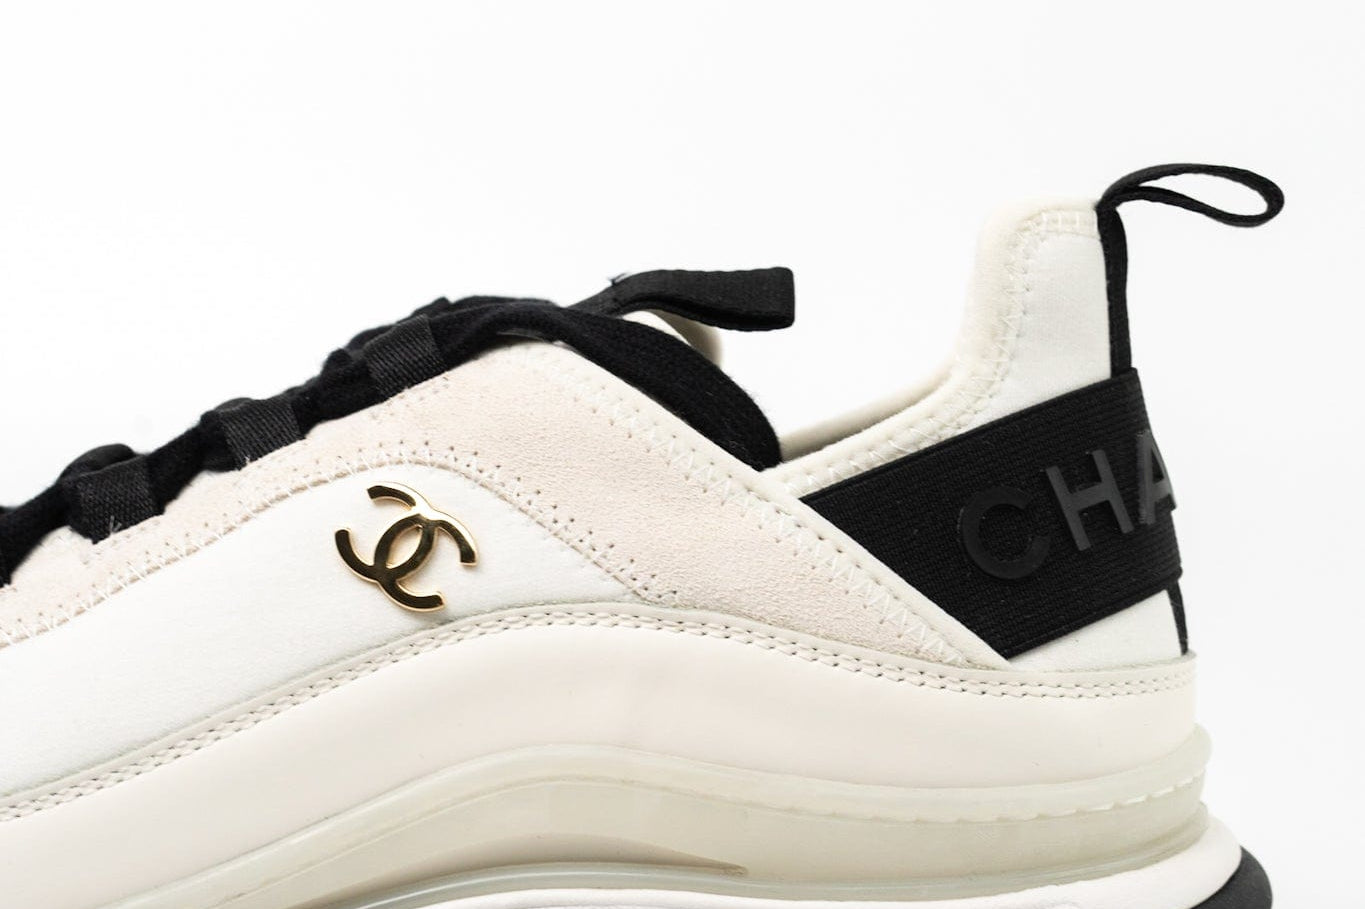 CHANEL Sneakers White Chanel Fabric Calfskin Suede CC Sneakers White ( Size 39.5) - Redeluxe